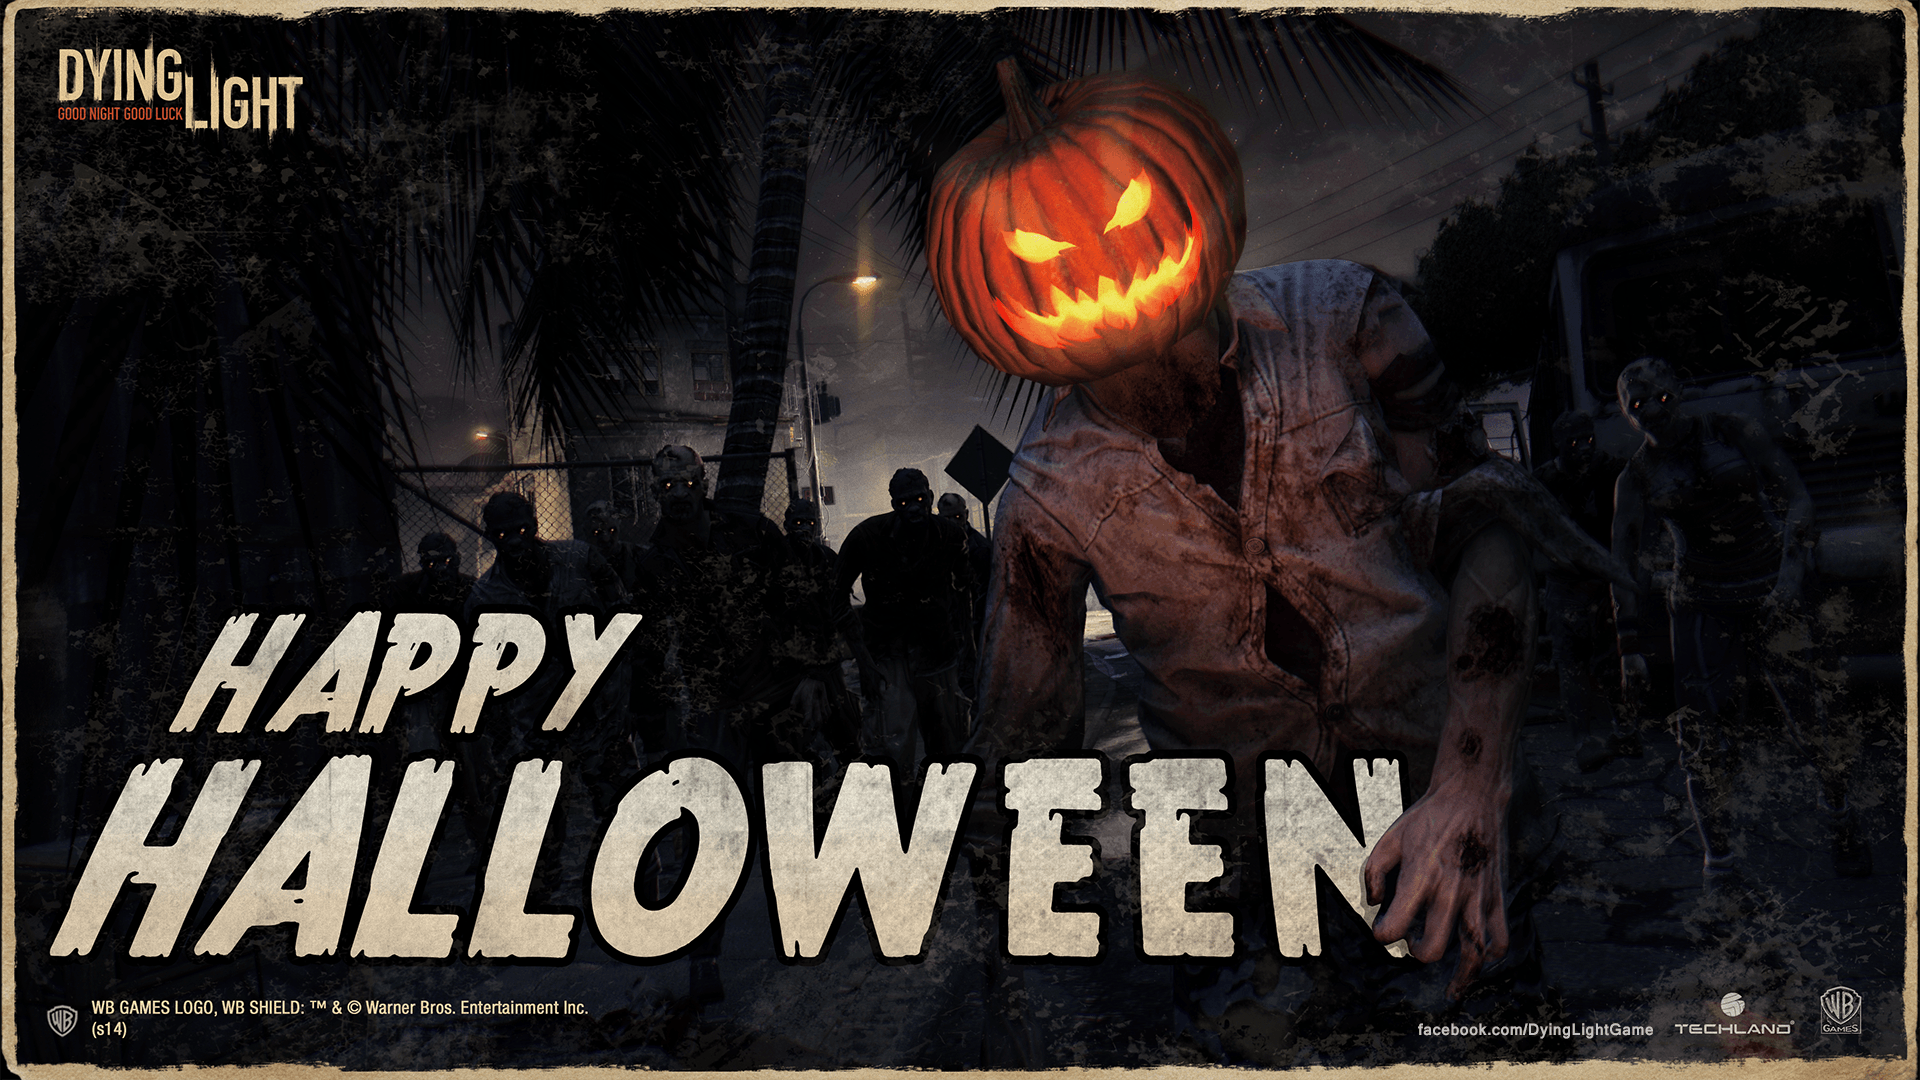 Get In The Halloween Spirit With These 'Dying Light' Wallpaper